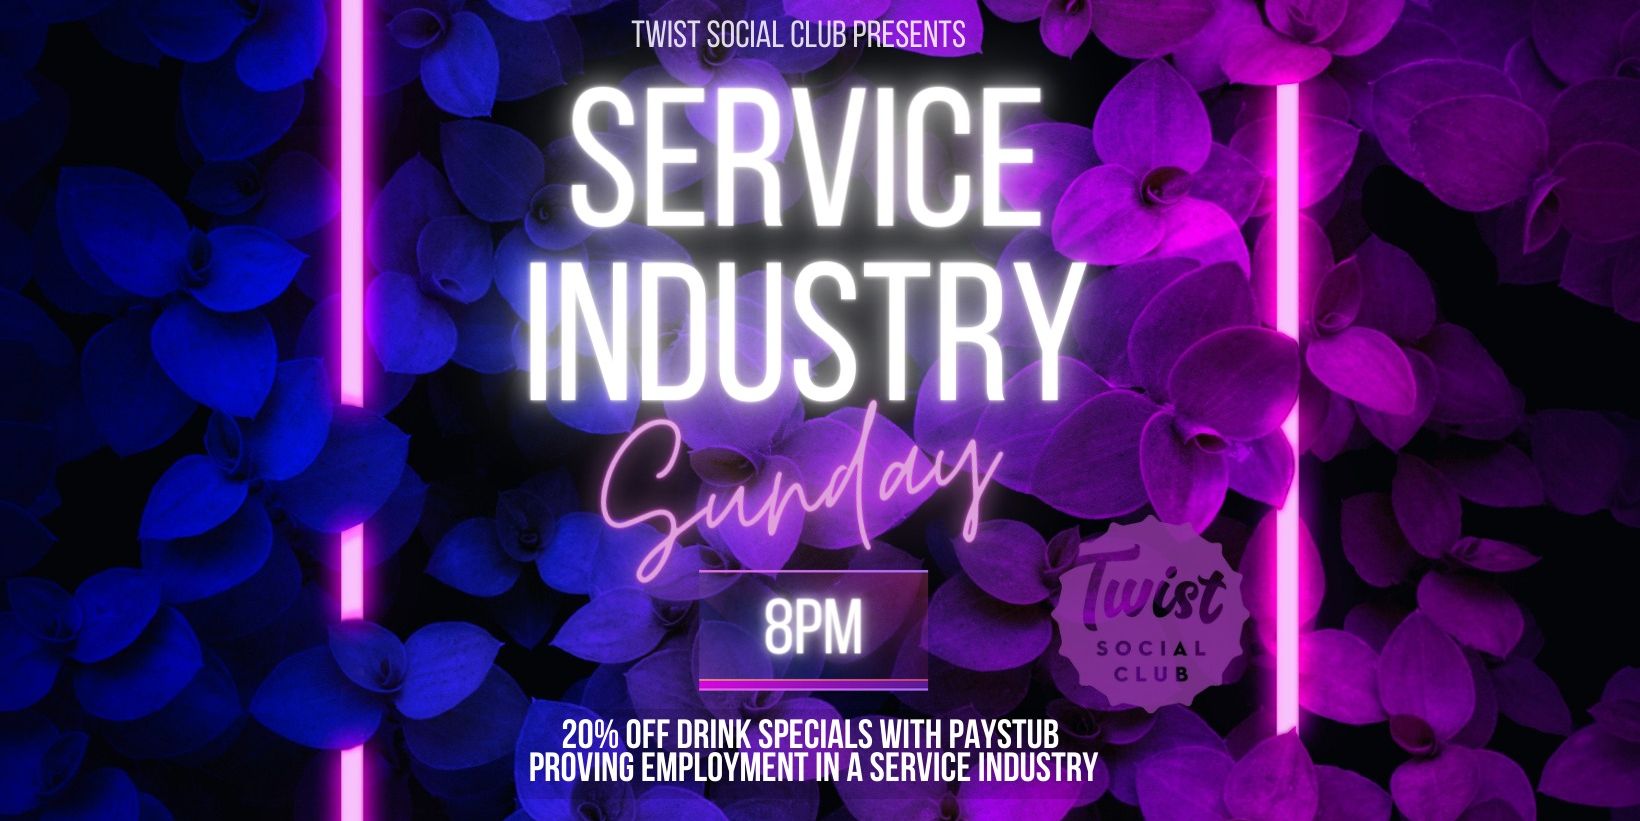 Service Industry Night promotional image